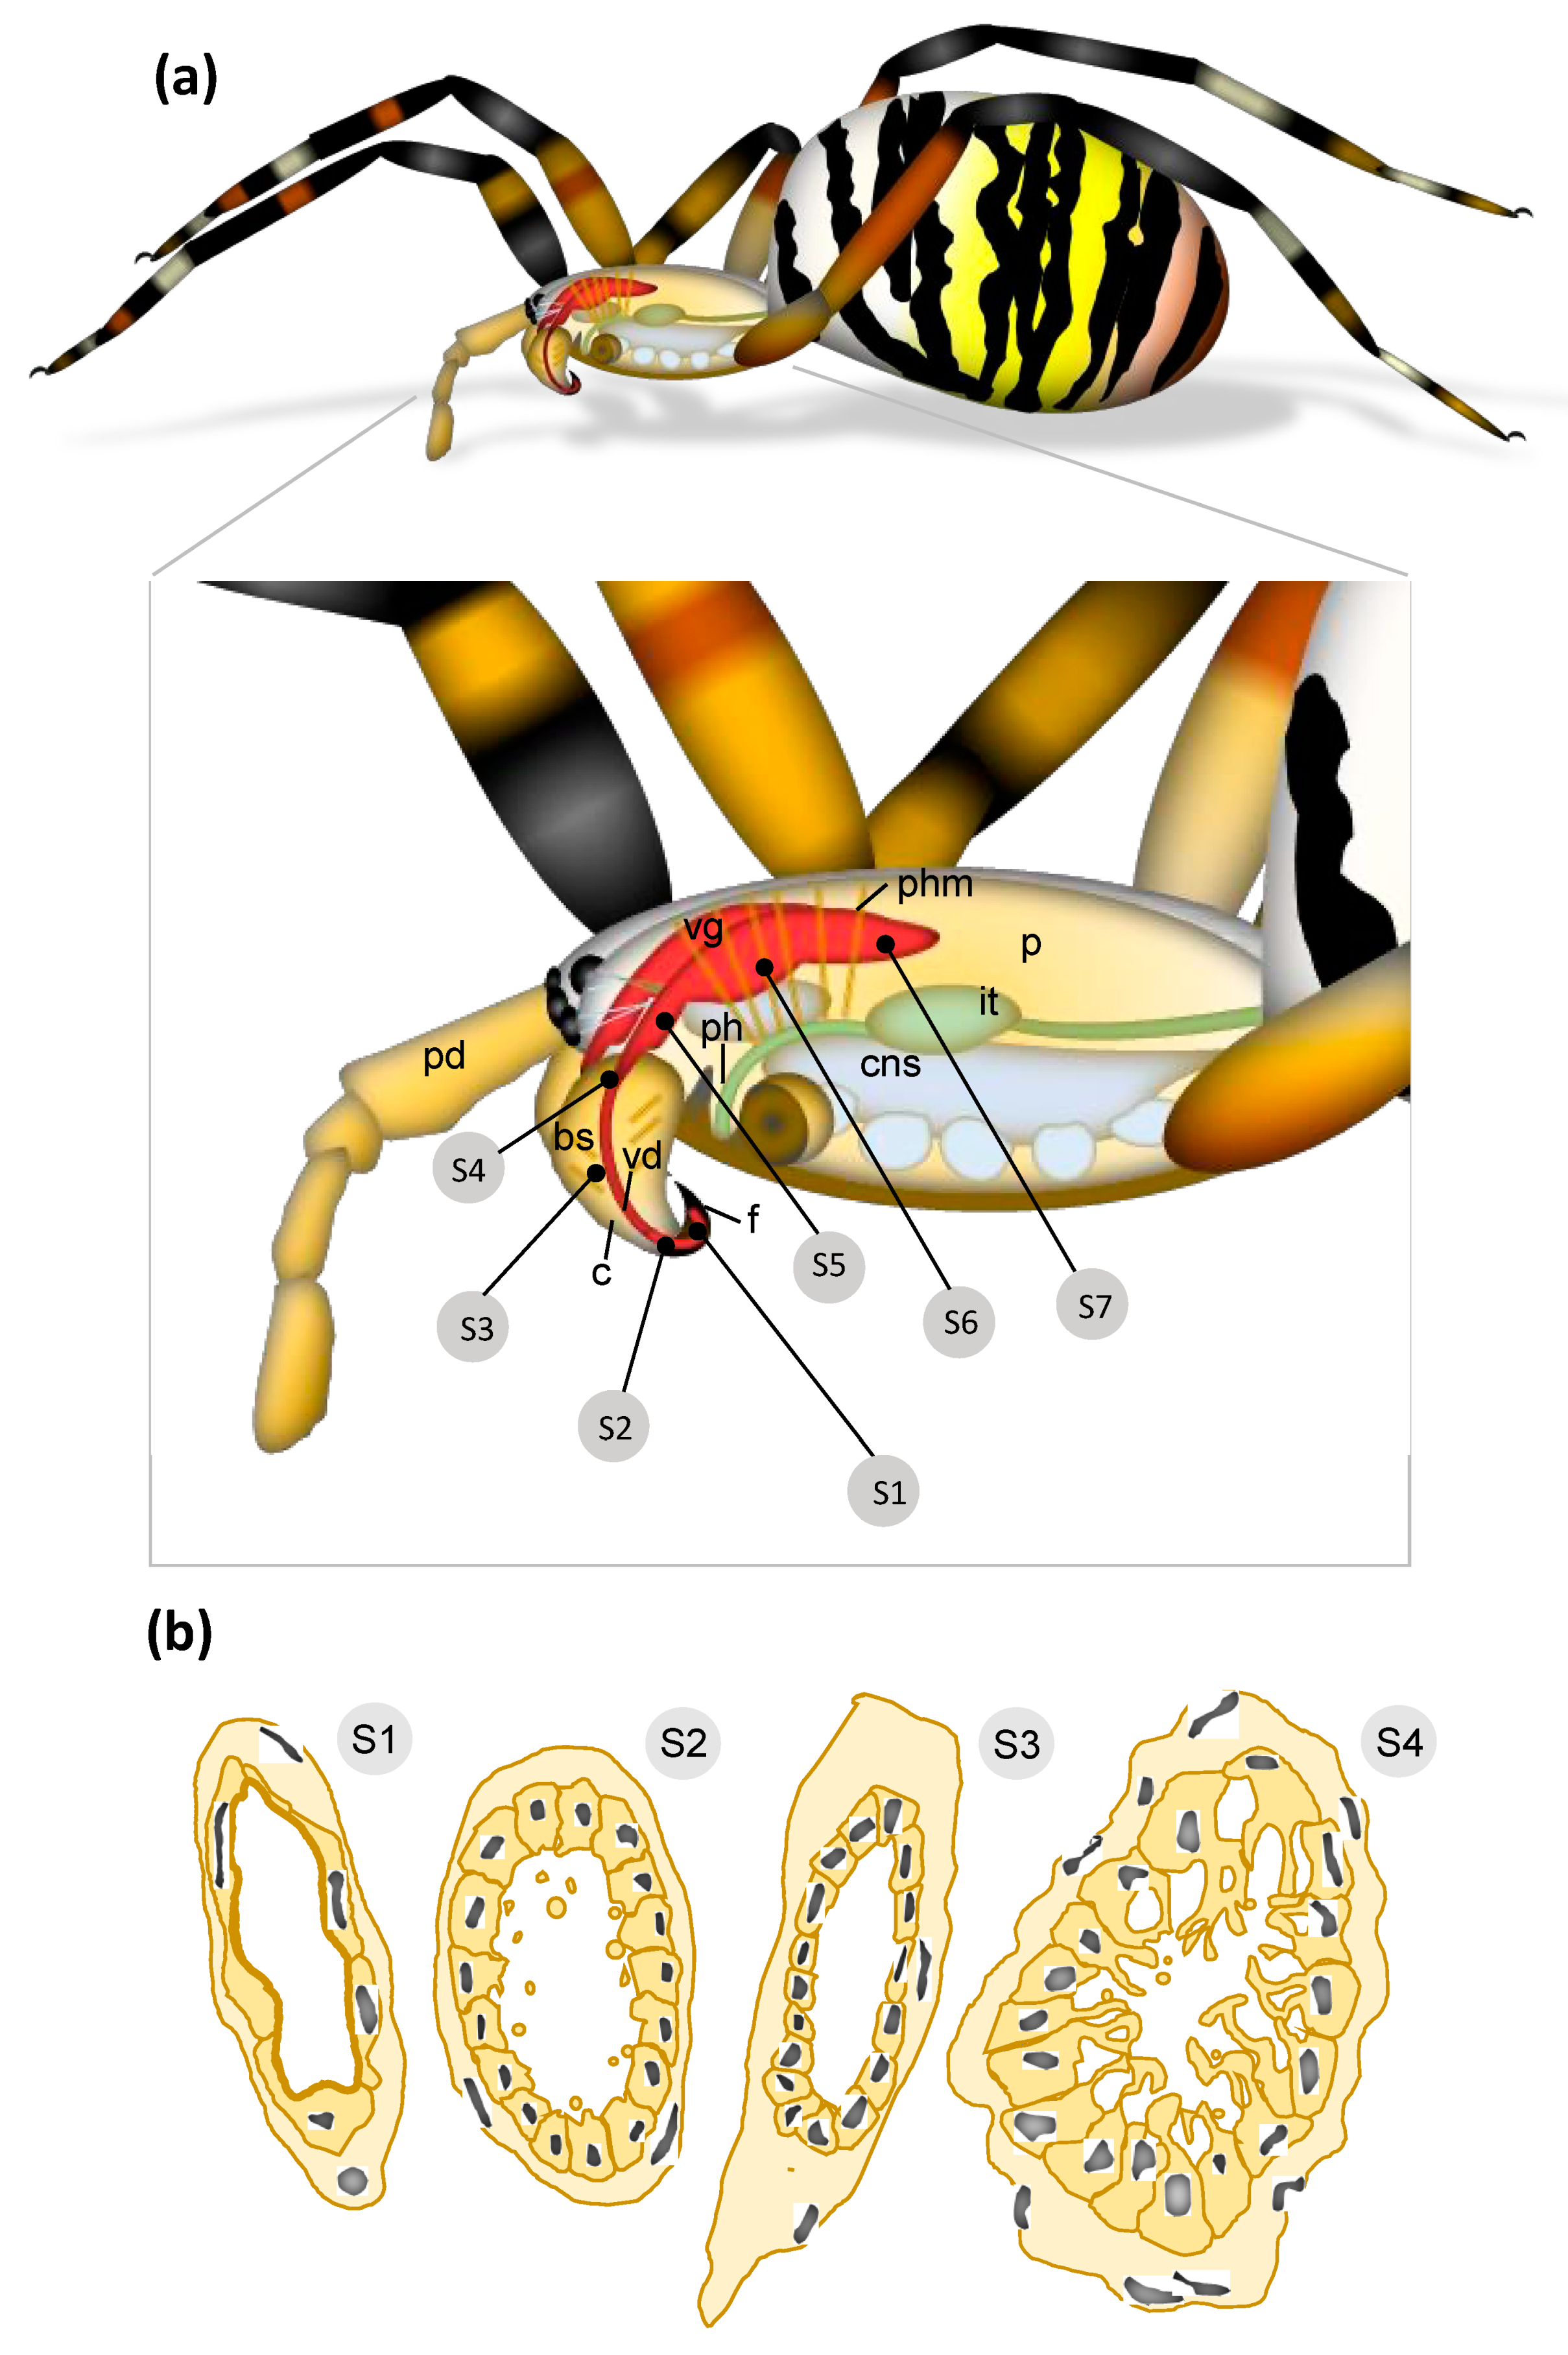 The mechanical characterization of the legs, fangs, and prosoma in